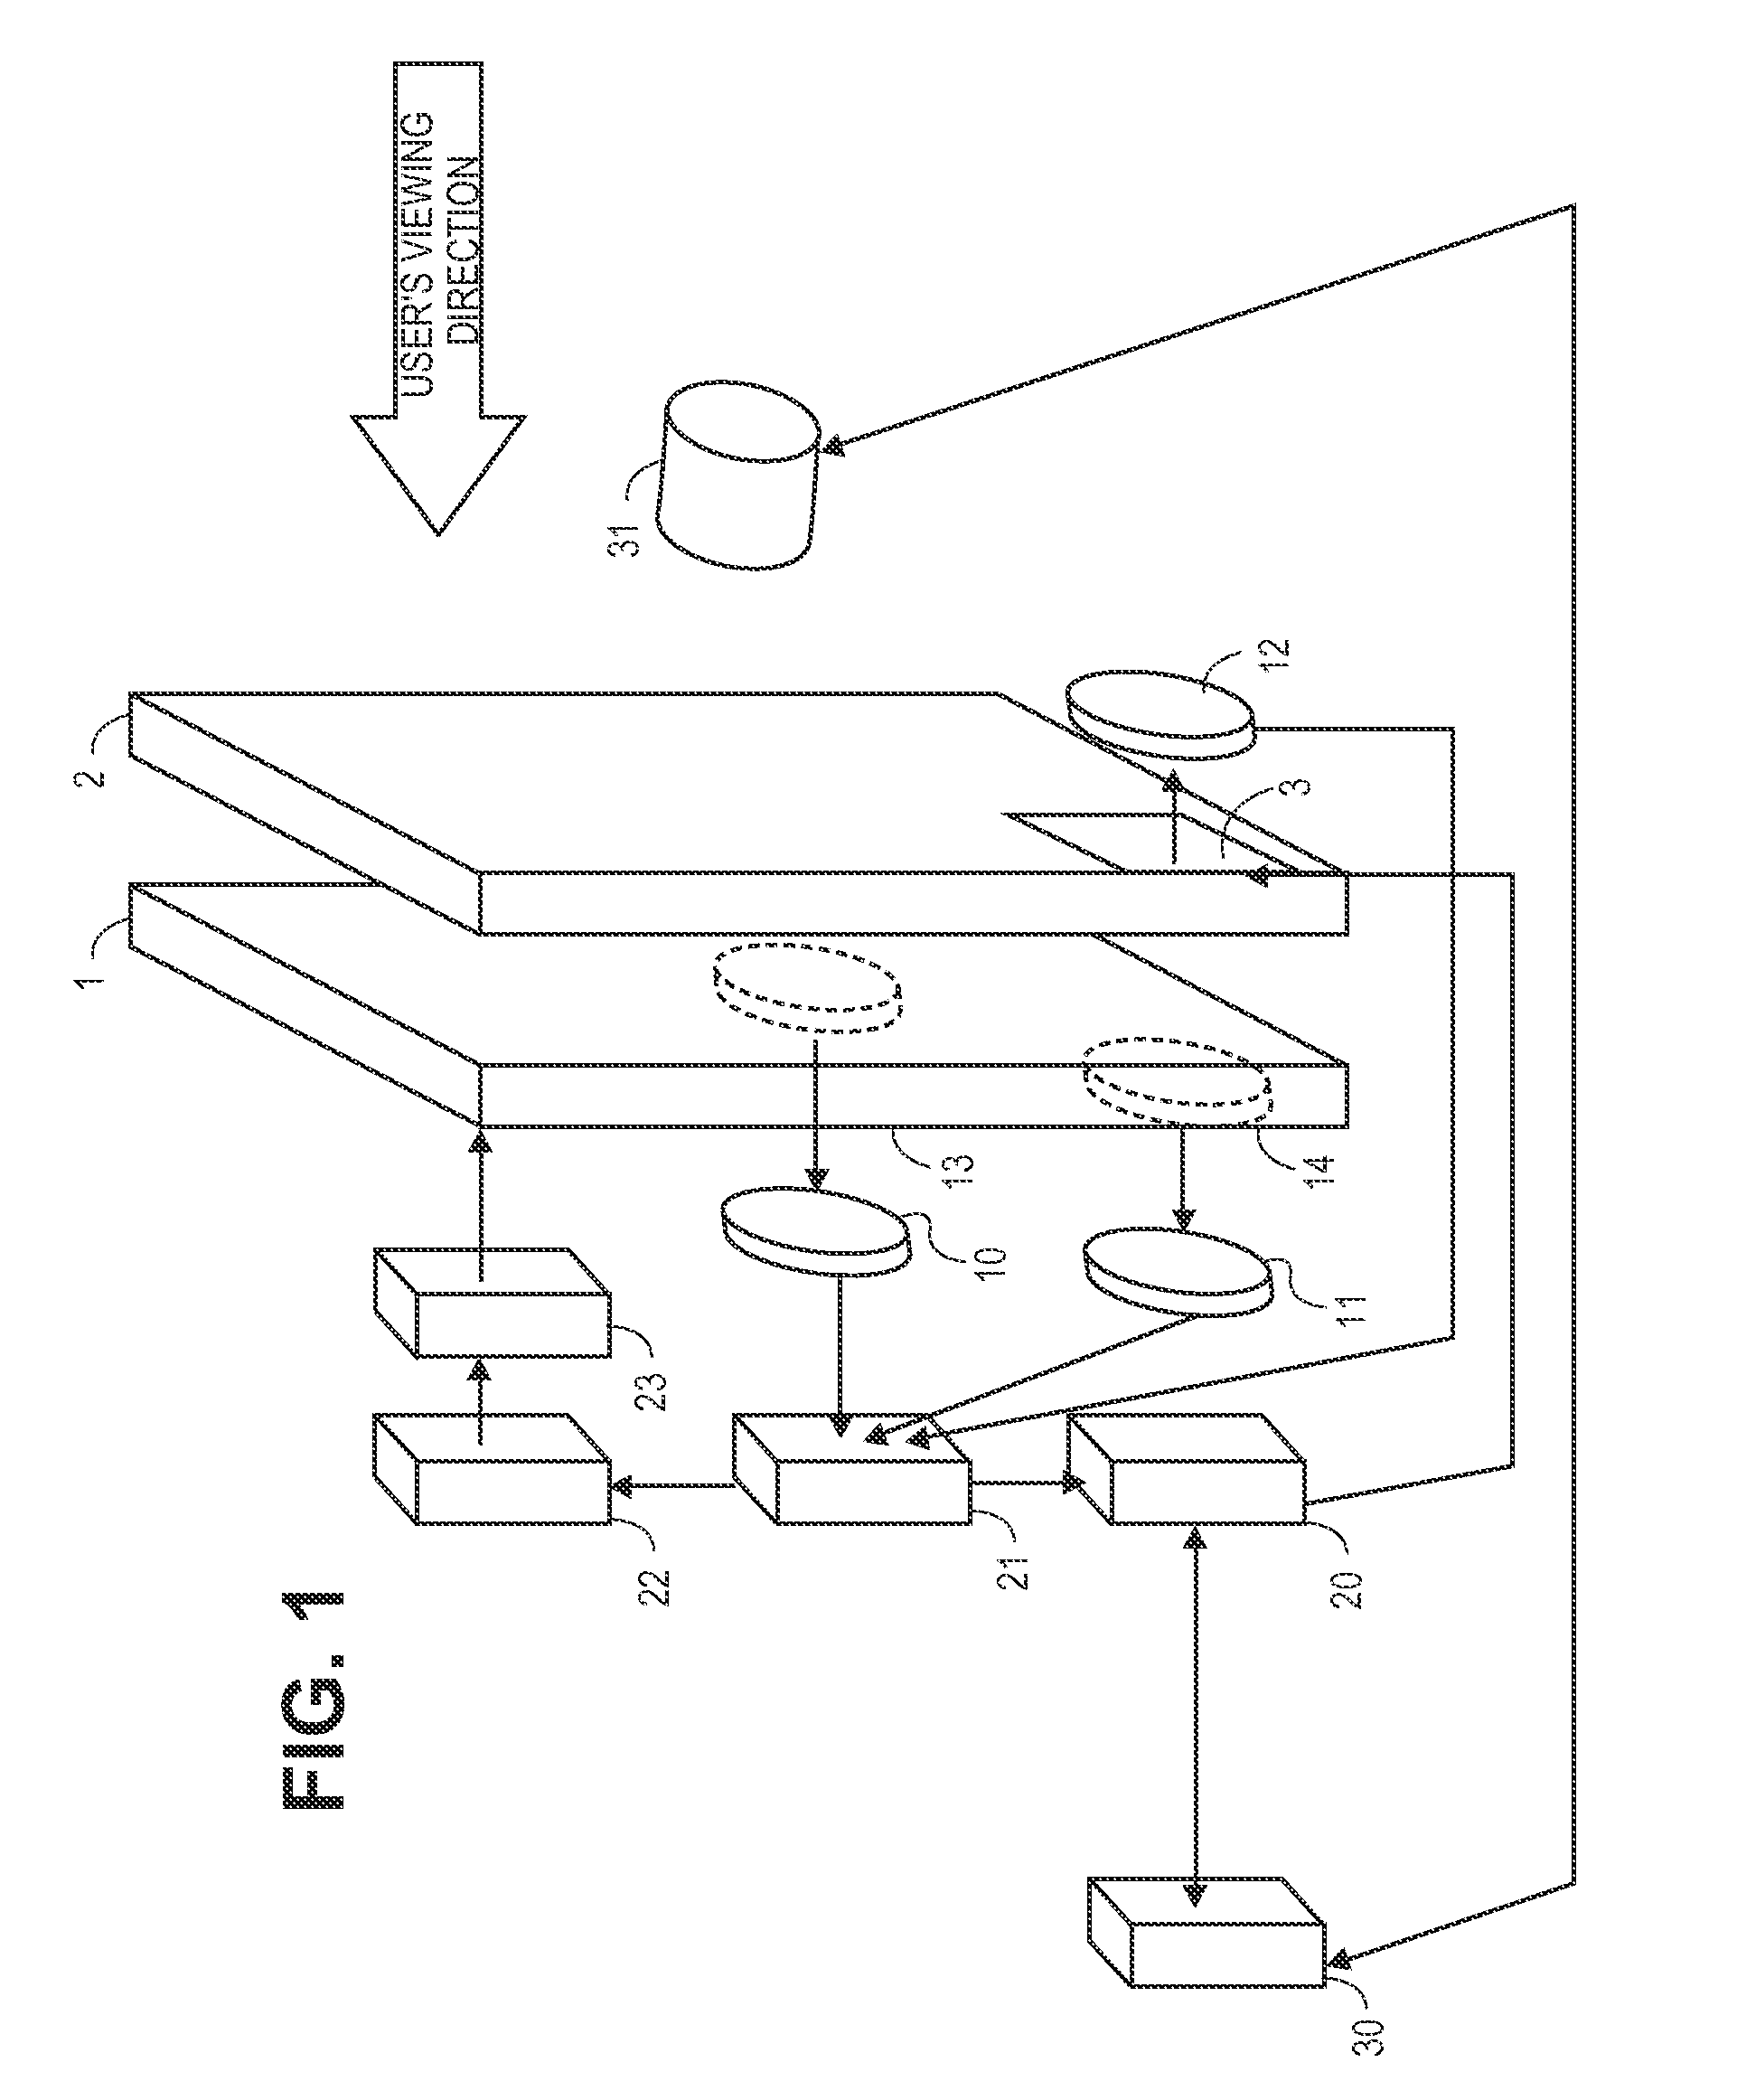 Method and system for correction, measurement and display of images